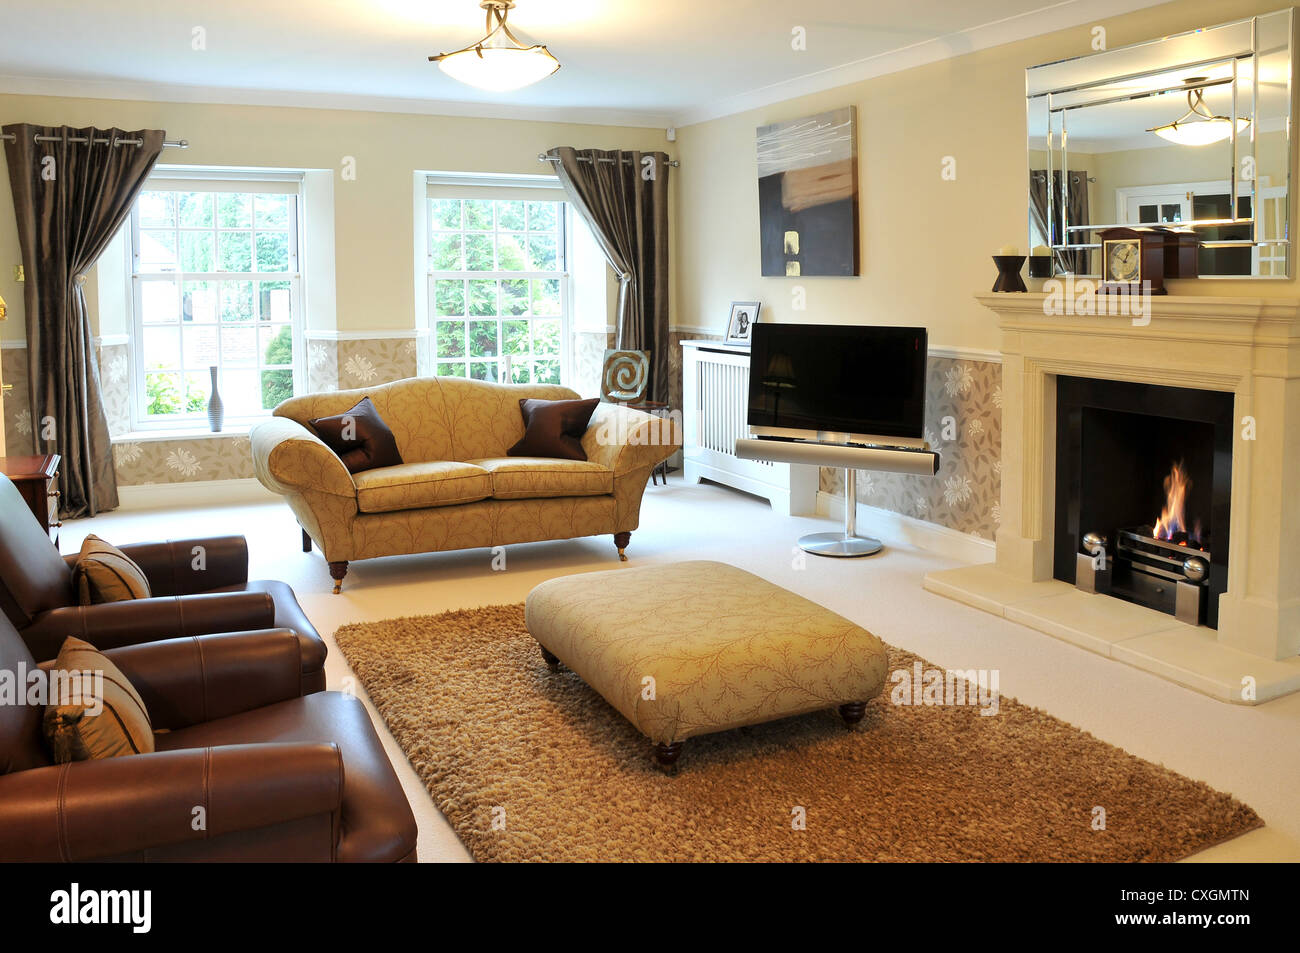 The interior designed lounge of a luxury house with sofas, TV fireplace ...